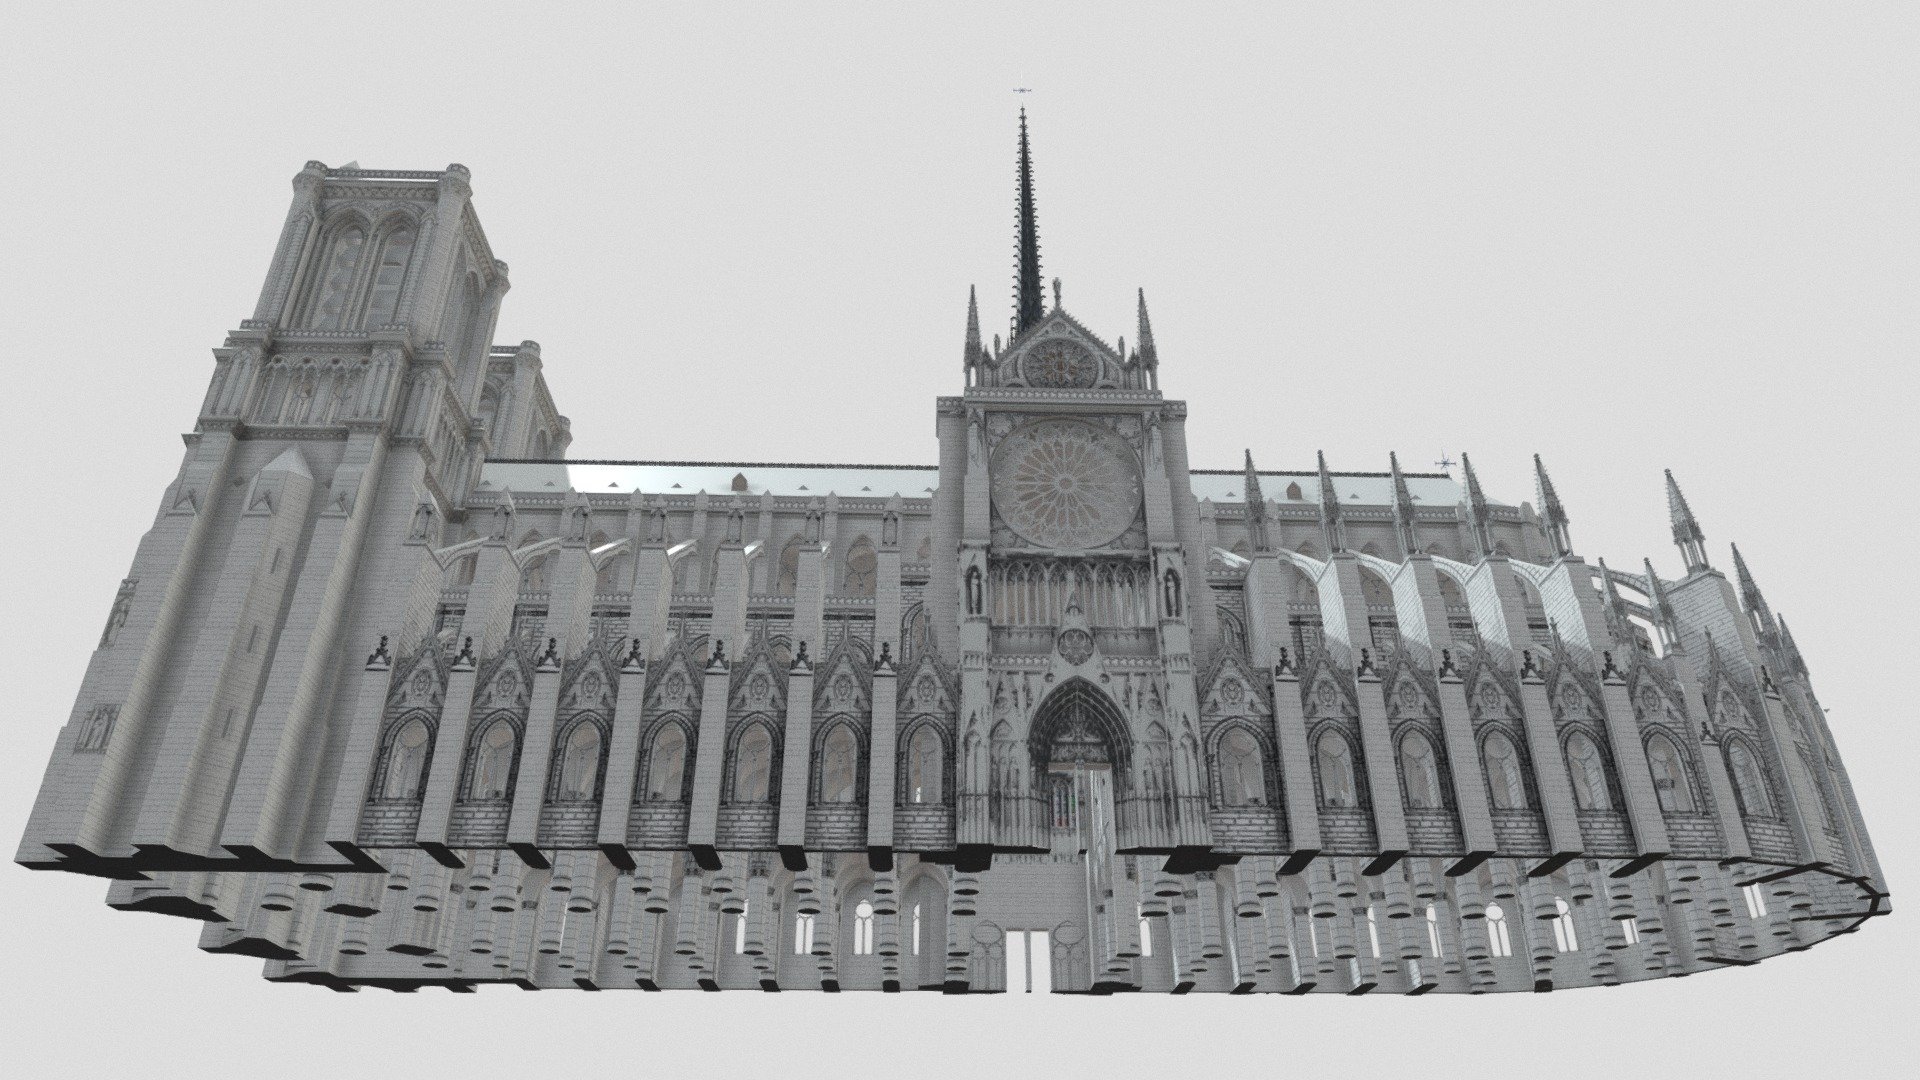 Download will include model in DAE, SKP, and KMZ formats. Email Myles Zhang about reuse.

Learn more about this project

Complete model of Notre-Dame inside and out. Model has been peer reviewed for accuracy by scholars at Columbia University's art history department and at the American Friends of Notre-Dame 3d model